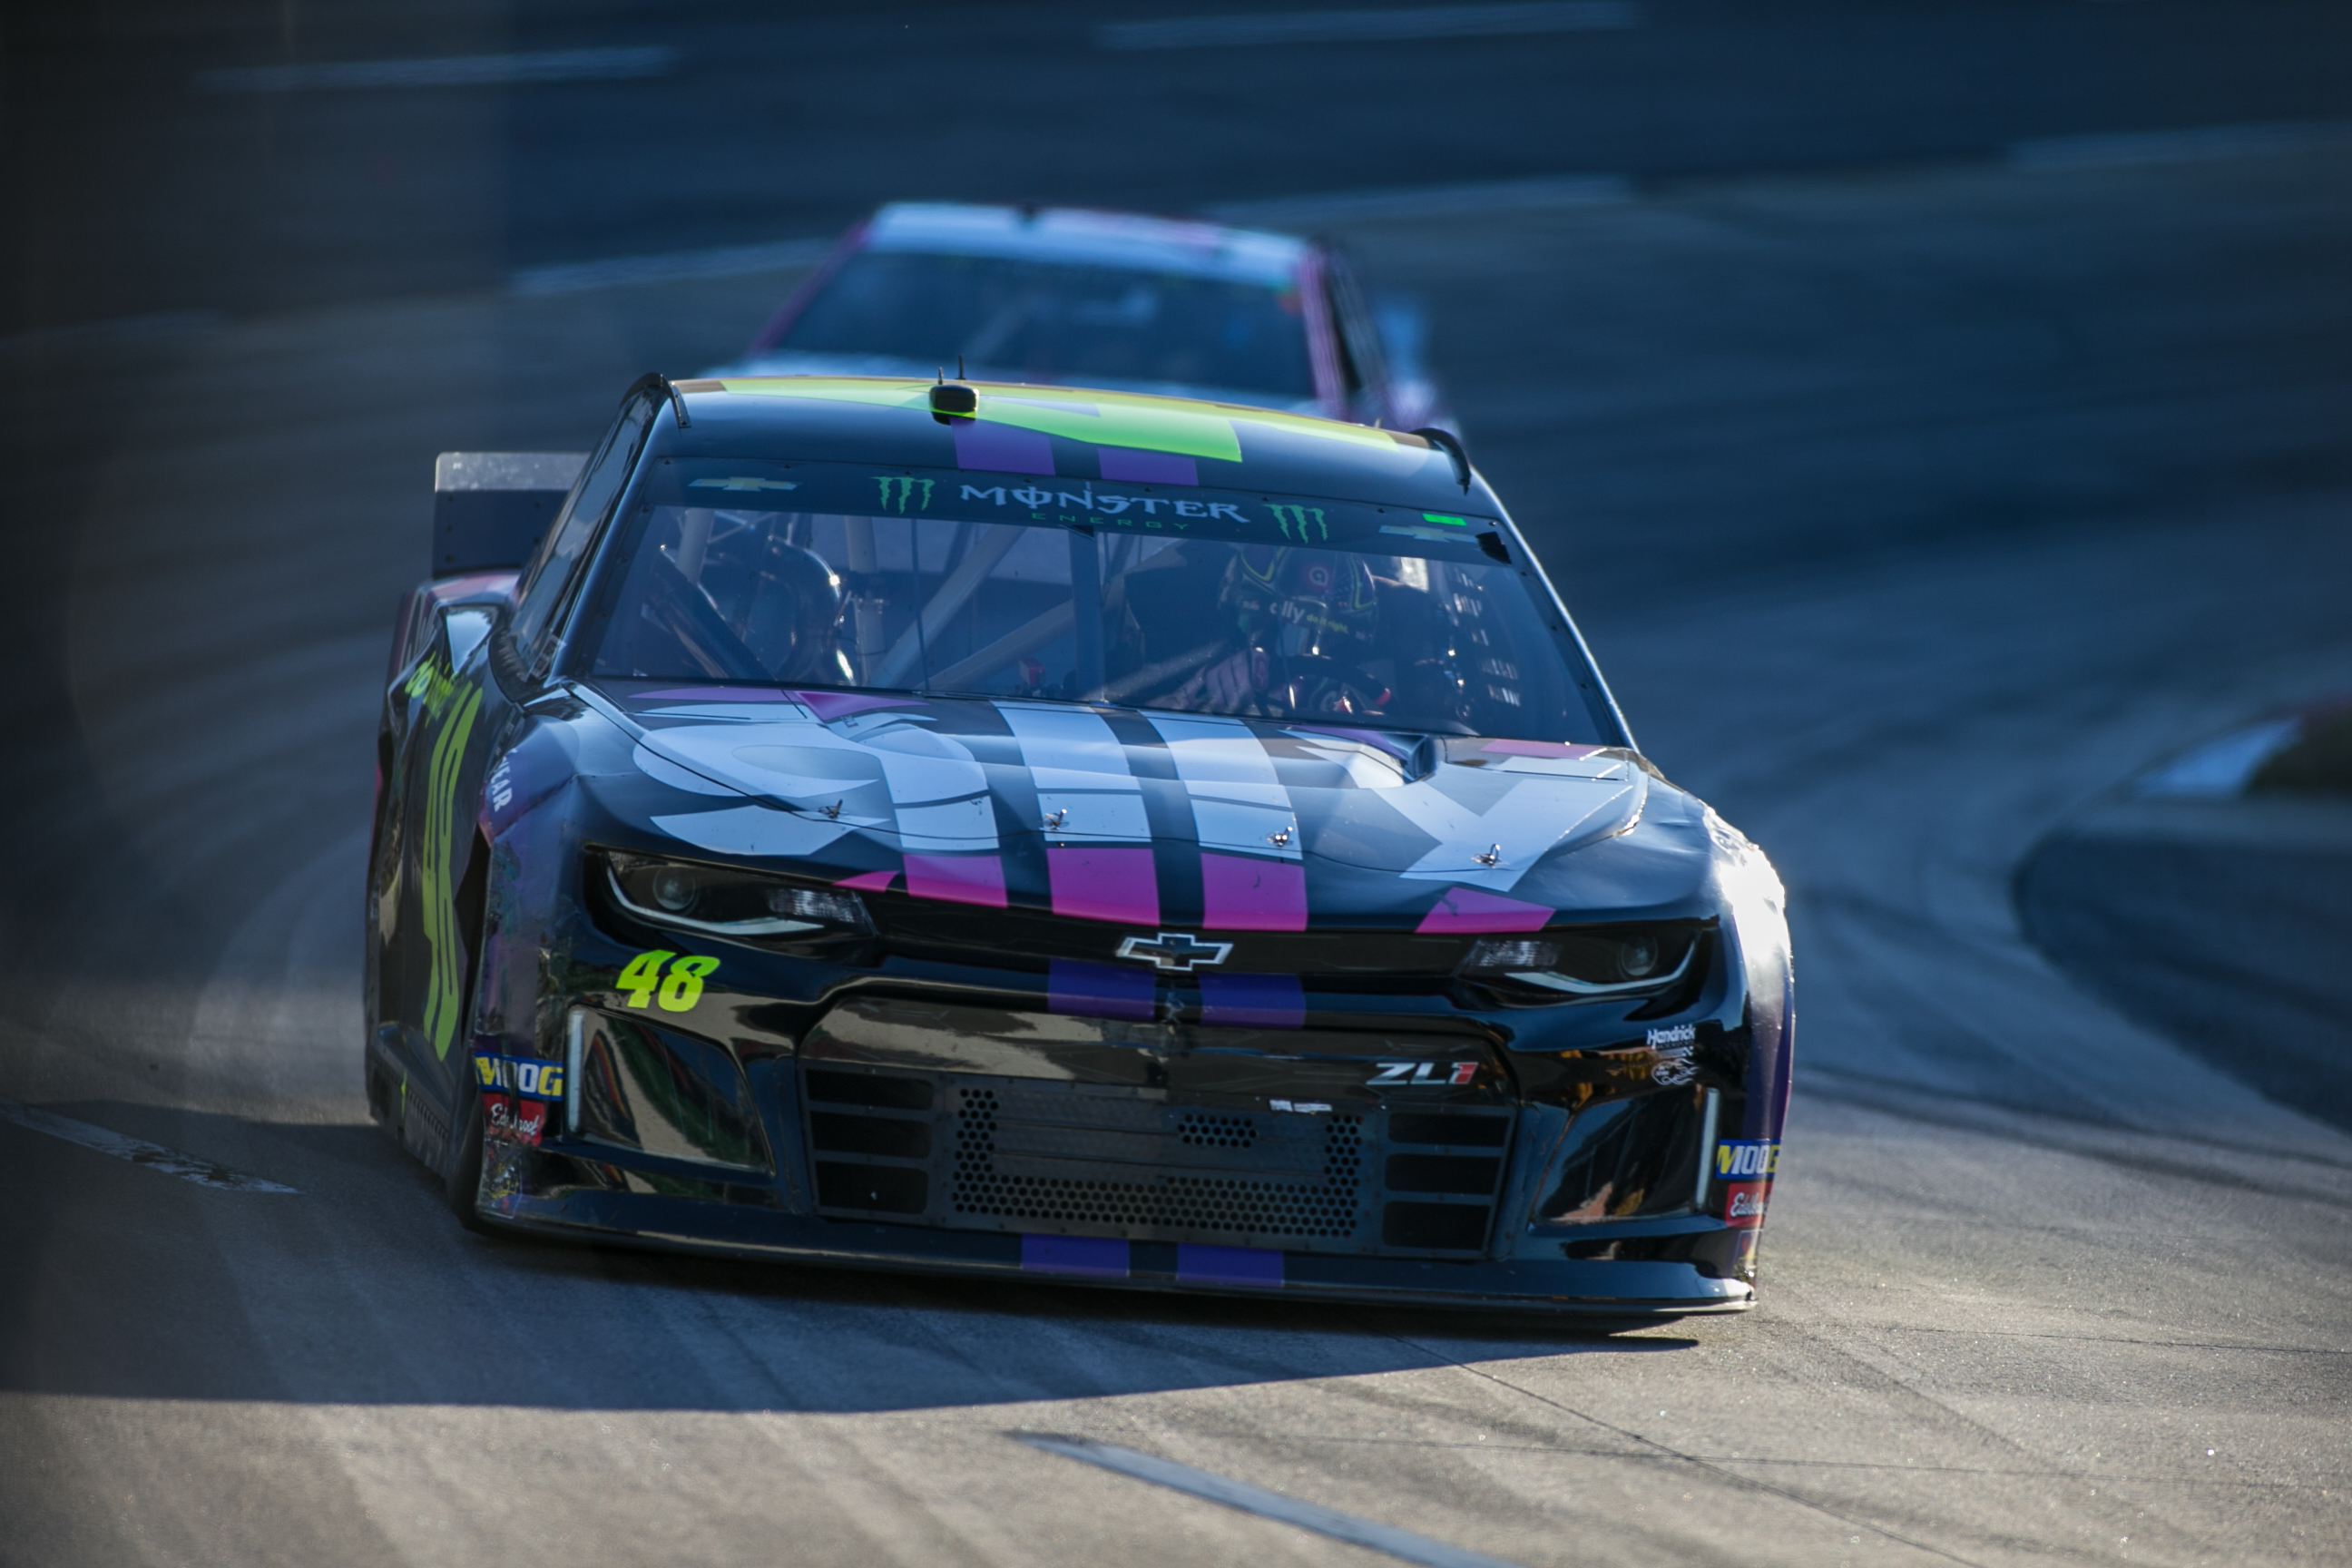 Truly, Johnson's desire for wins and championships remains vibrant as his paint scheme. (Photo Credit: Jonathan Huff/TPF)